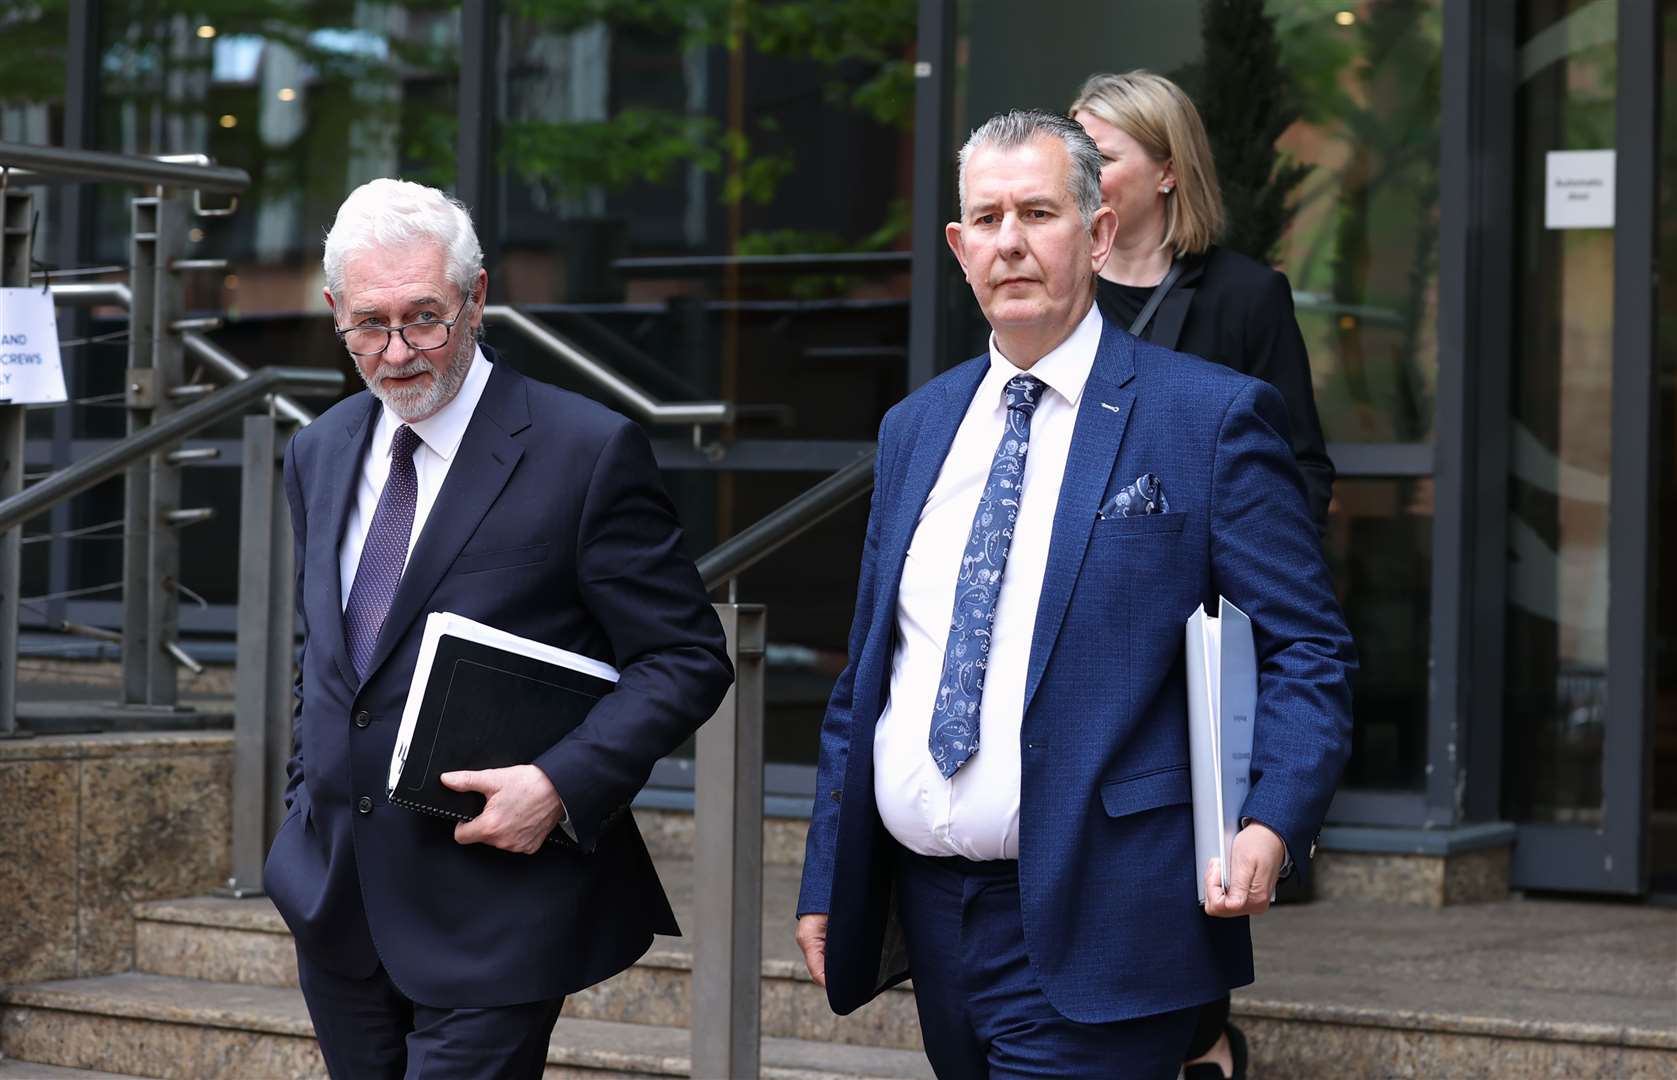 Former Stormont minister Edwin Poots (right) and solicitor John McBurney leaving the Clayton Hotel in Belfast after giving evidence at the UK Covid-19 Inquiry hearing on Thursday (Liam McBurney/PA)